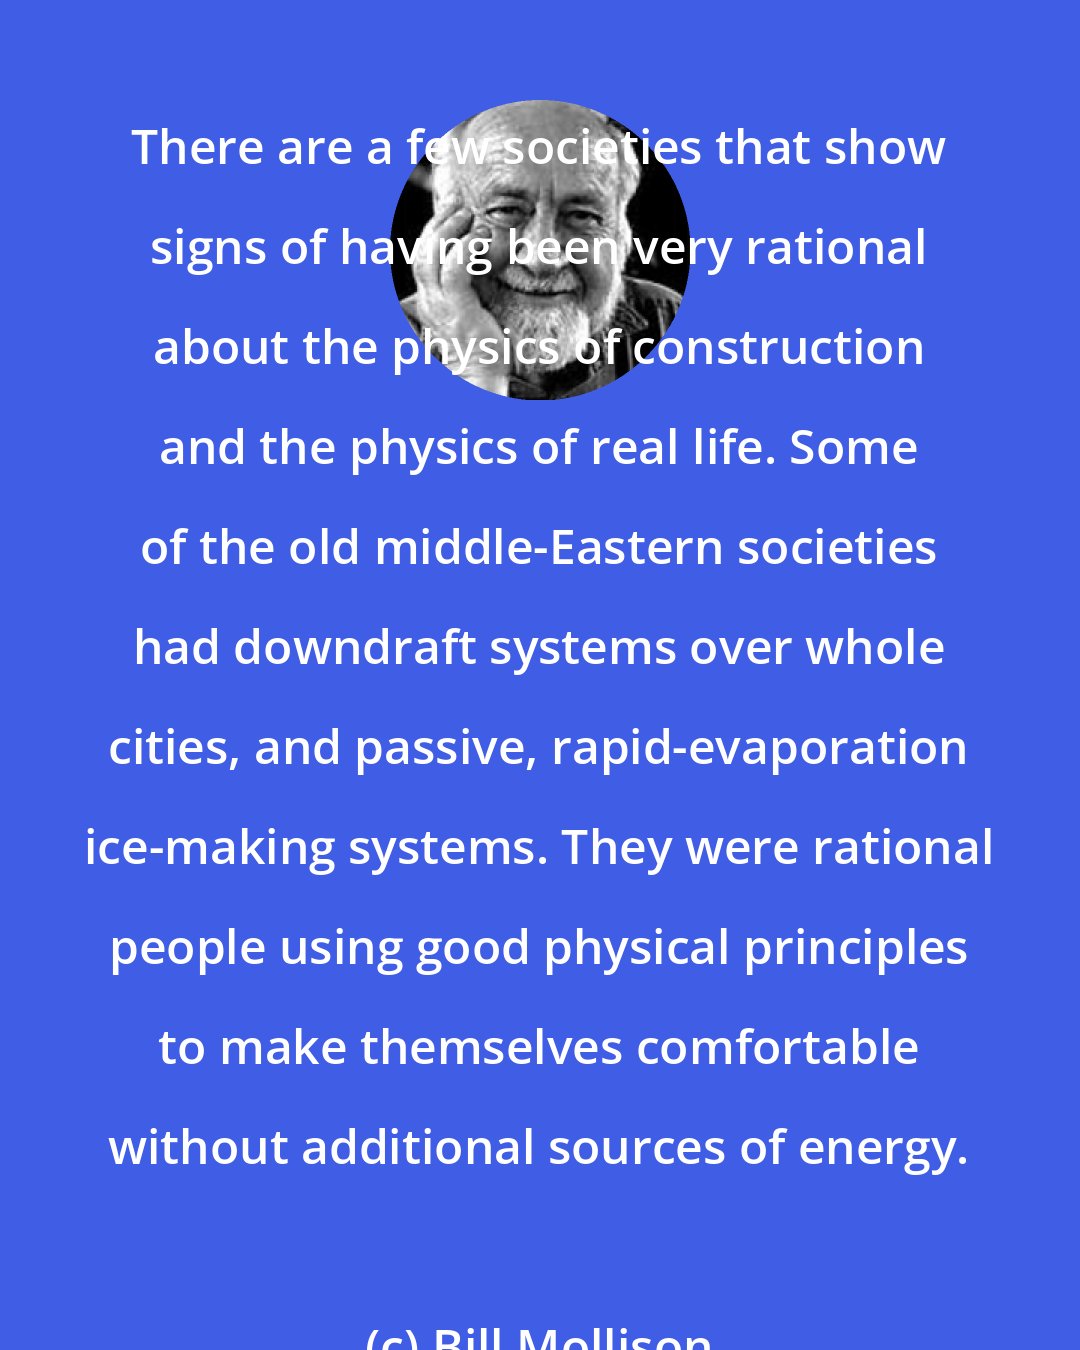 Bill Mollison: There are a few societies that show signs of having been very rational about the physics of construction and the physics of real life. Some of the old middle-Eastern societies had downdraft systems over whole cities, and passive, rapid-evaporation ice-making systems. They were rational people using good physical principles to make themselves comfortable without additional sources of energy.